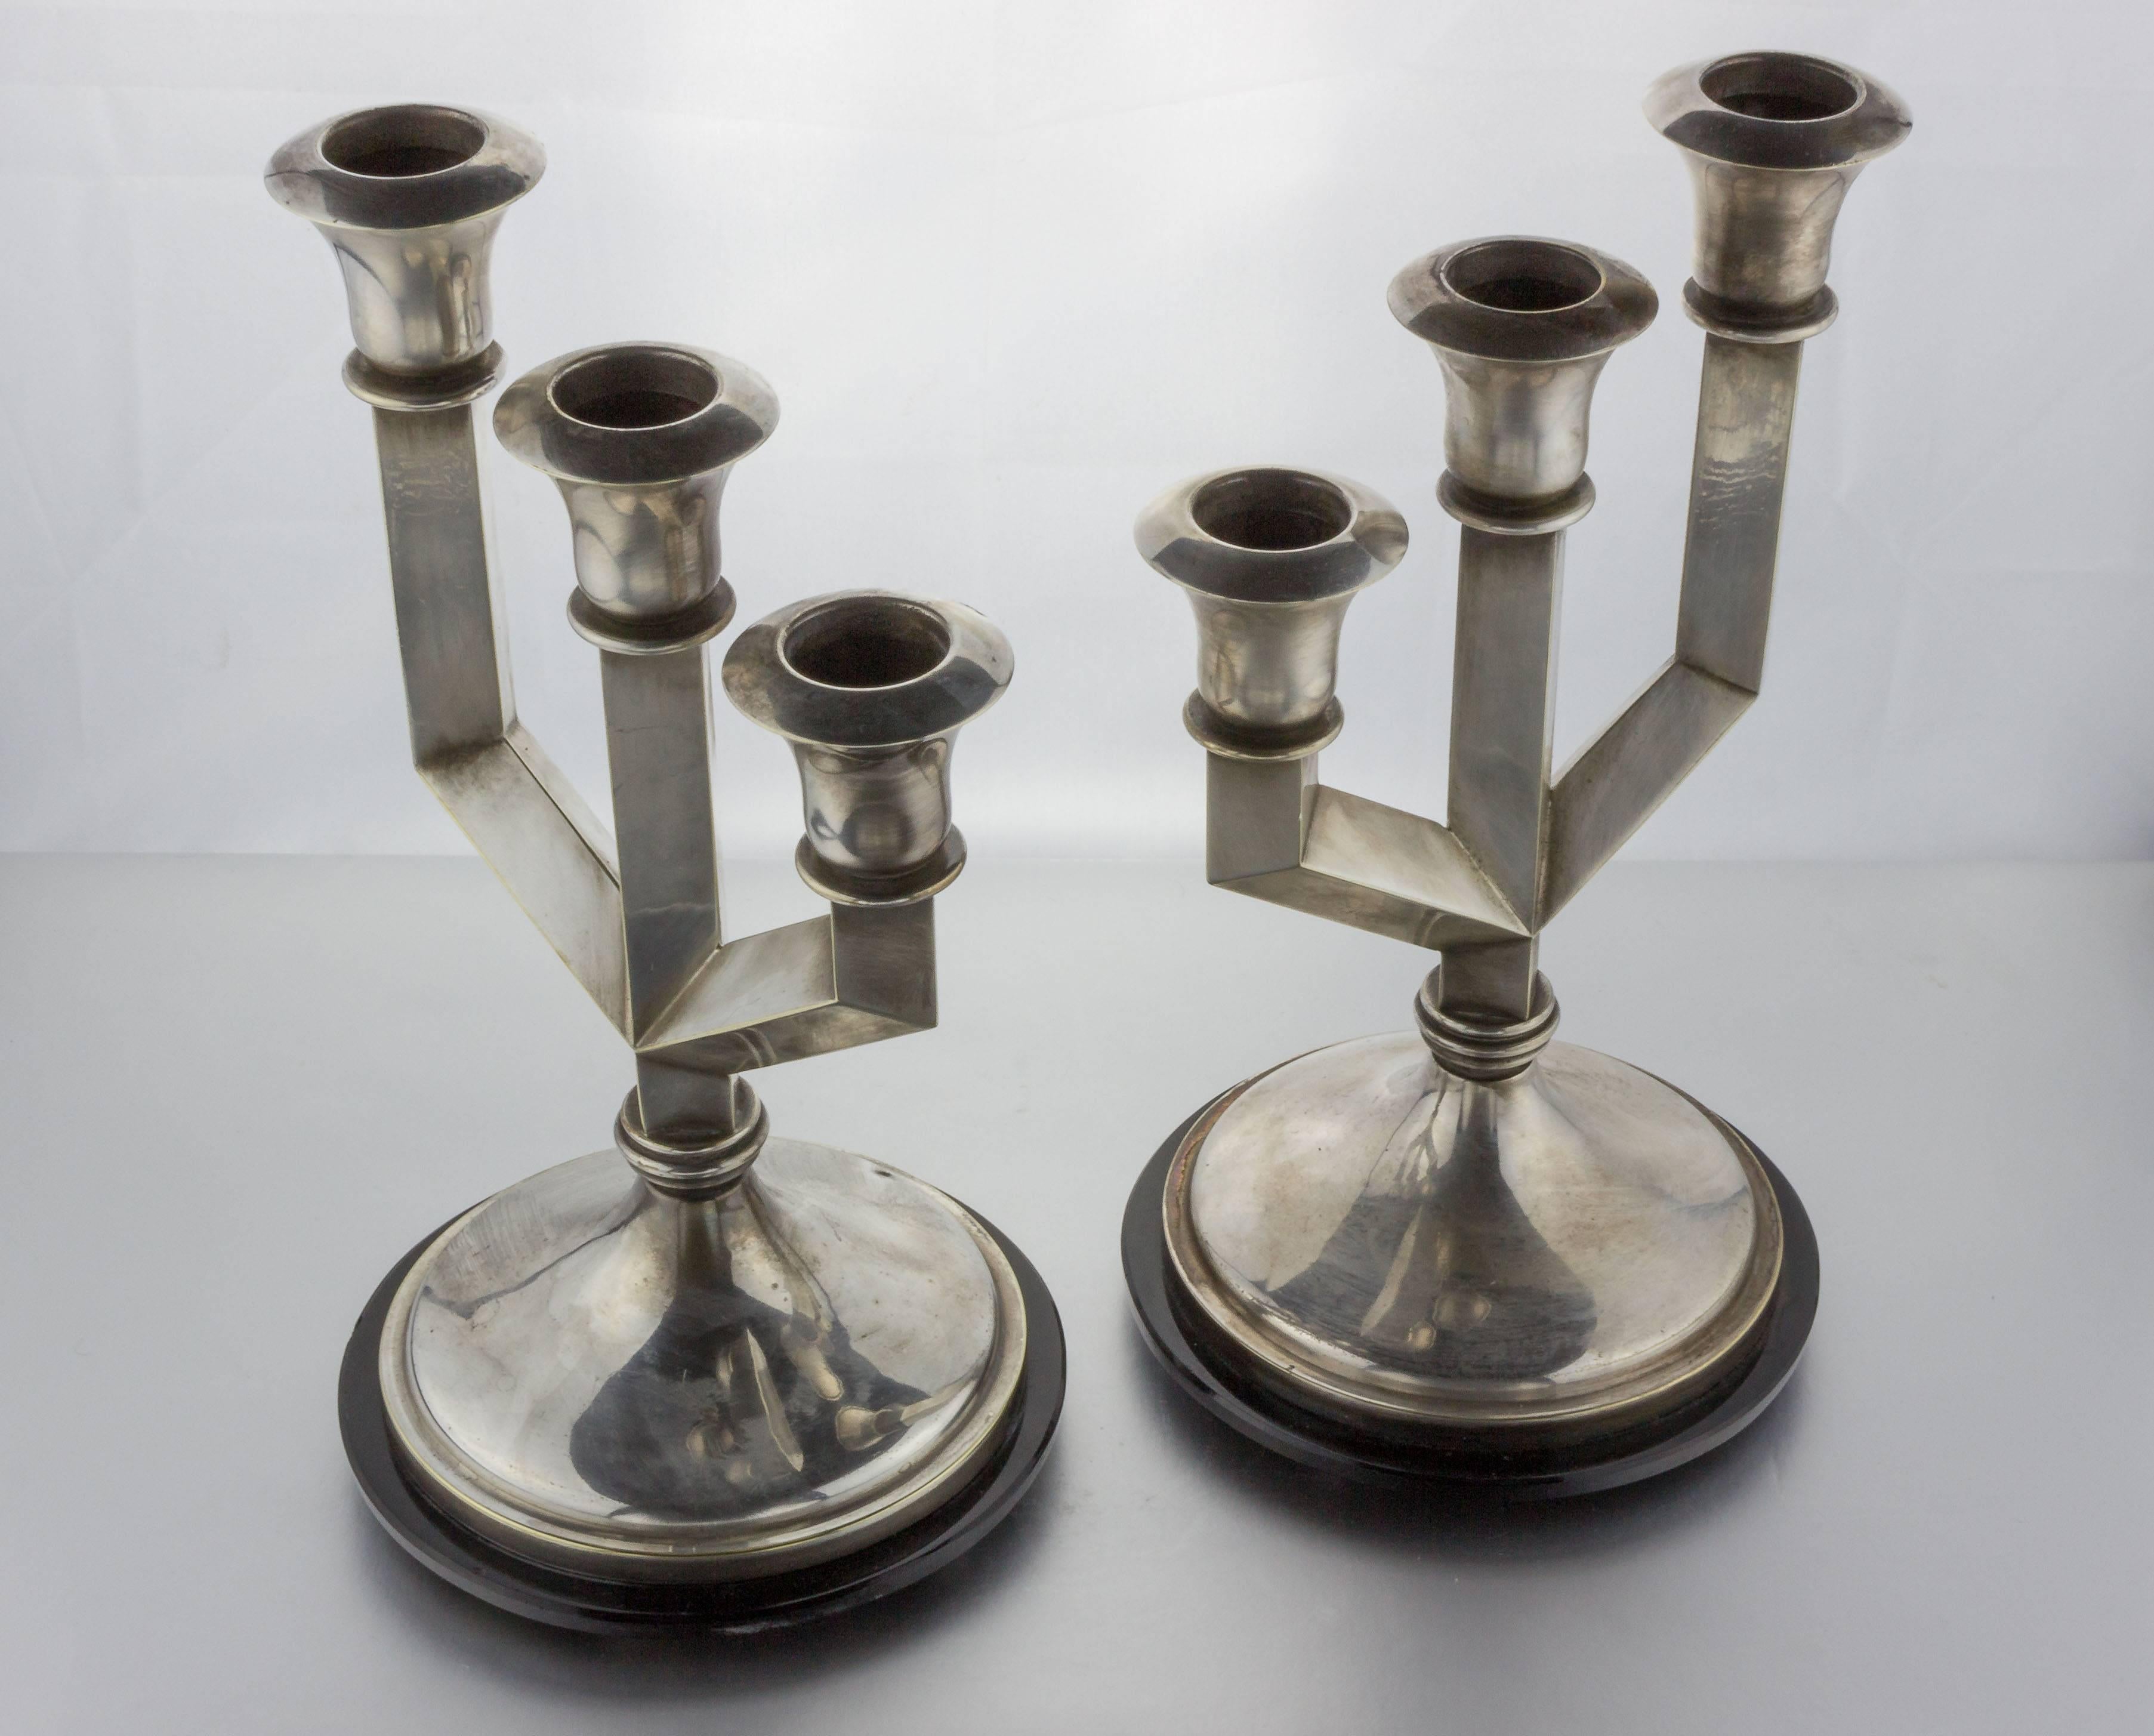 Pair of 1930s French Art Deco silver plated candelabras with bakelite bases. Very good vintage condition.

Ref #: D1115-01

Dimensions: 11.25